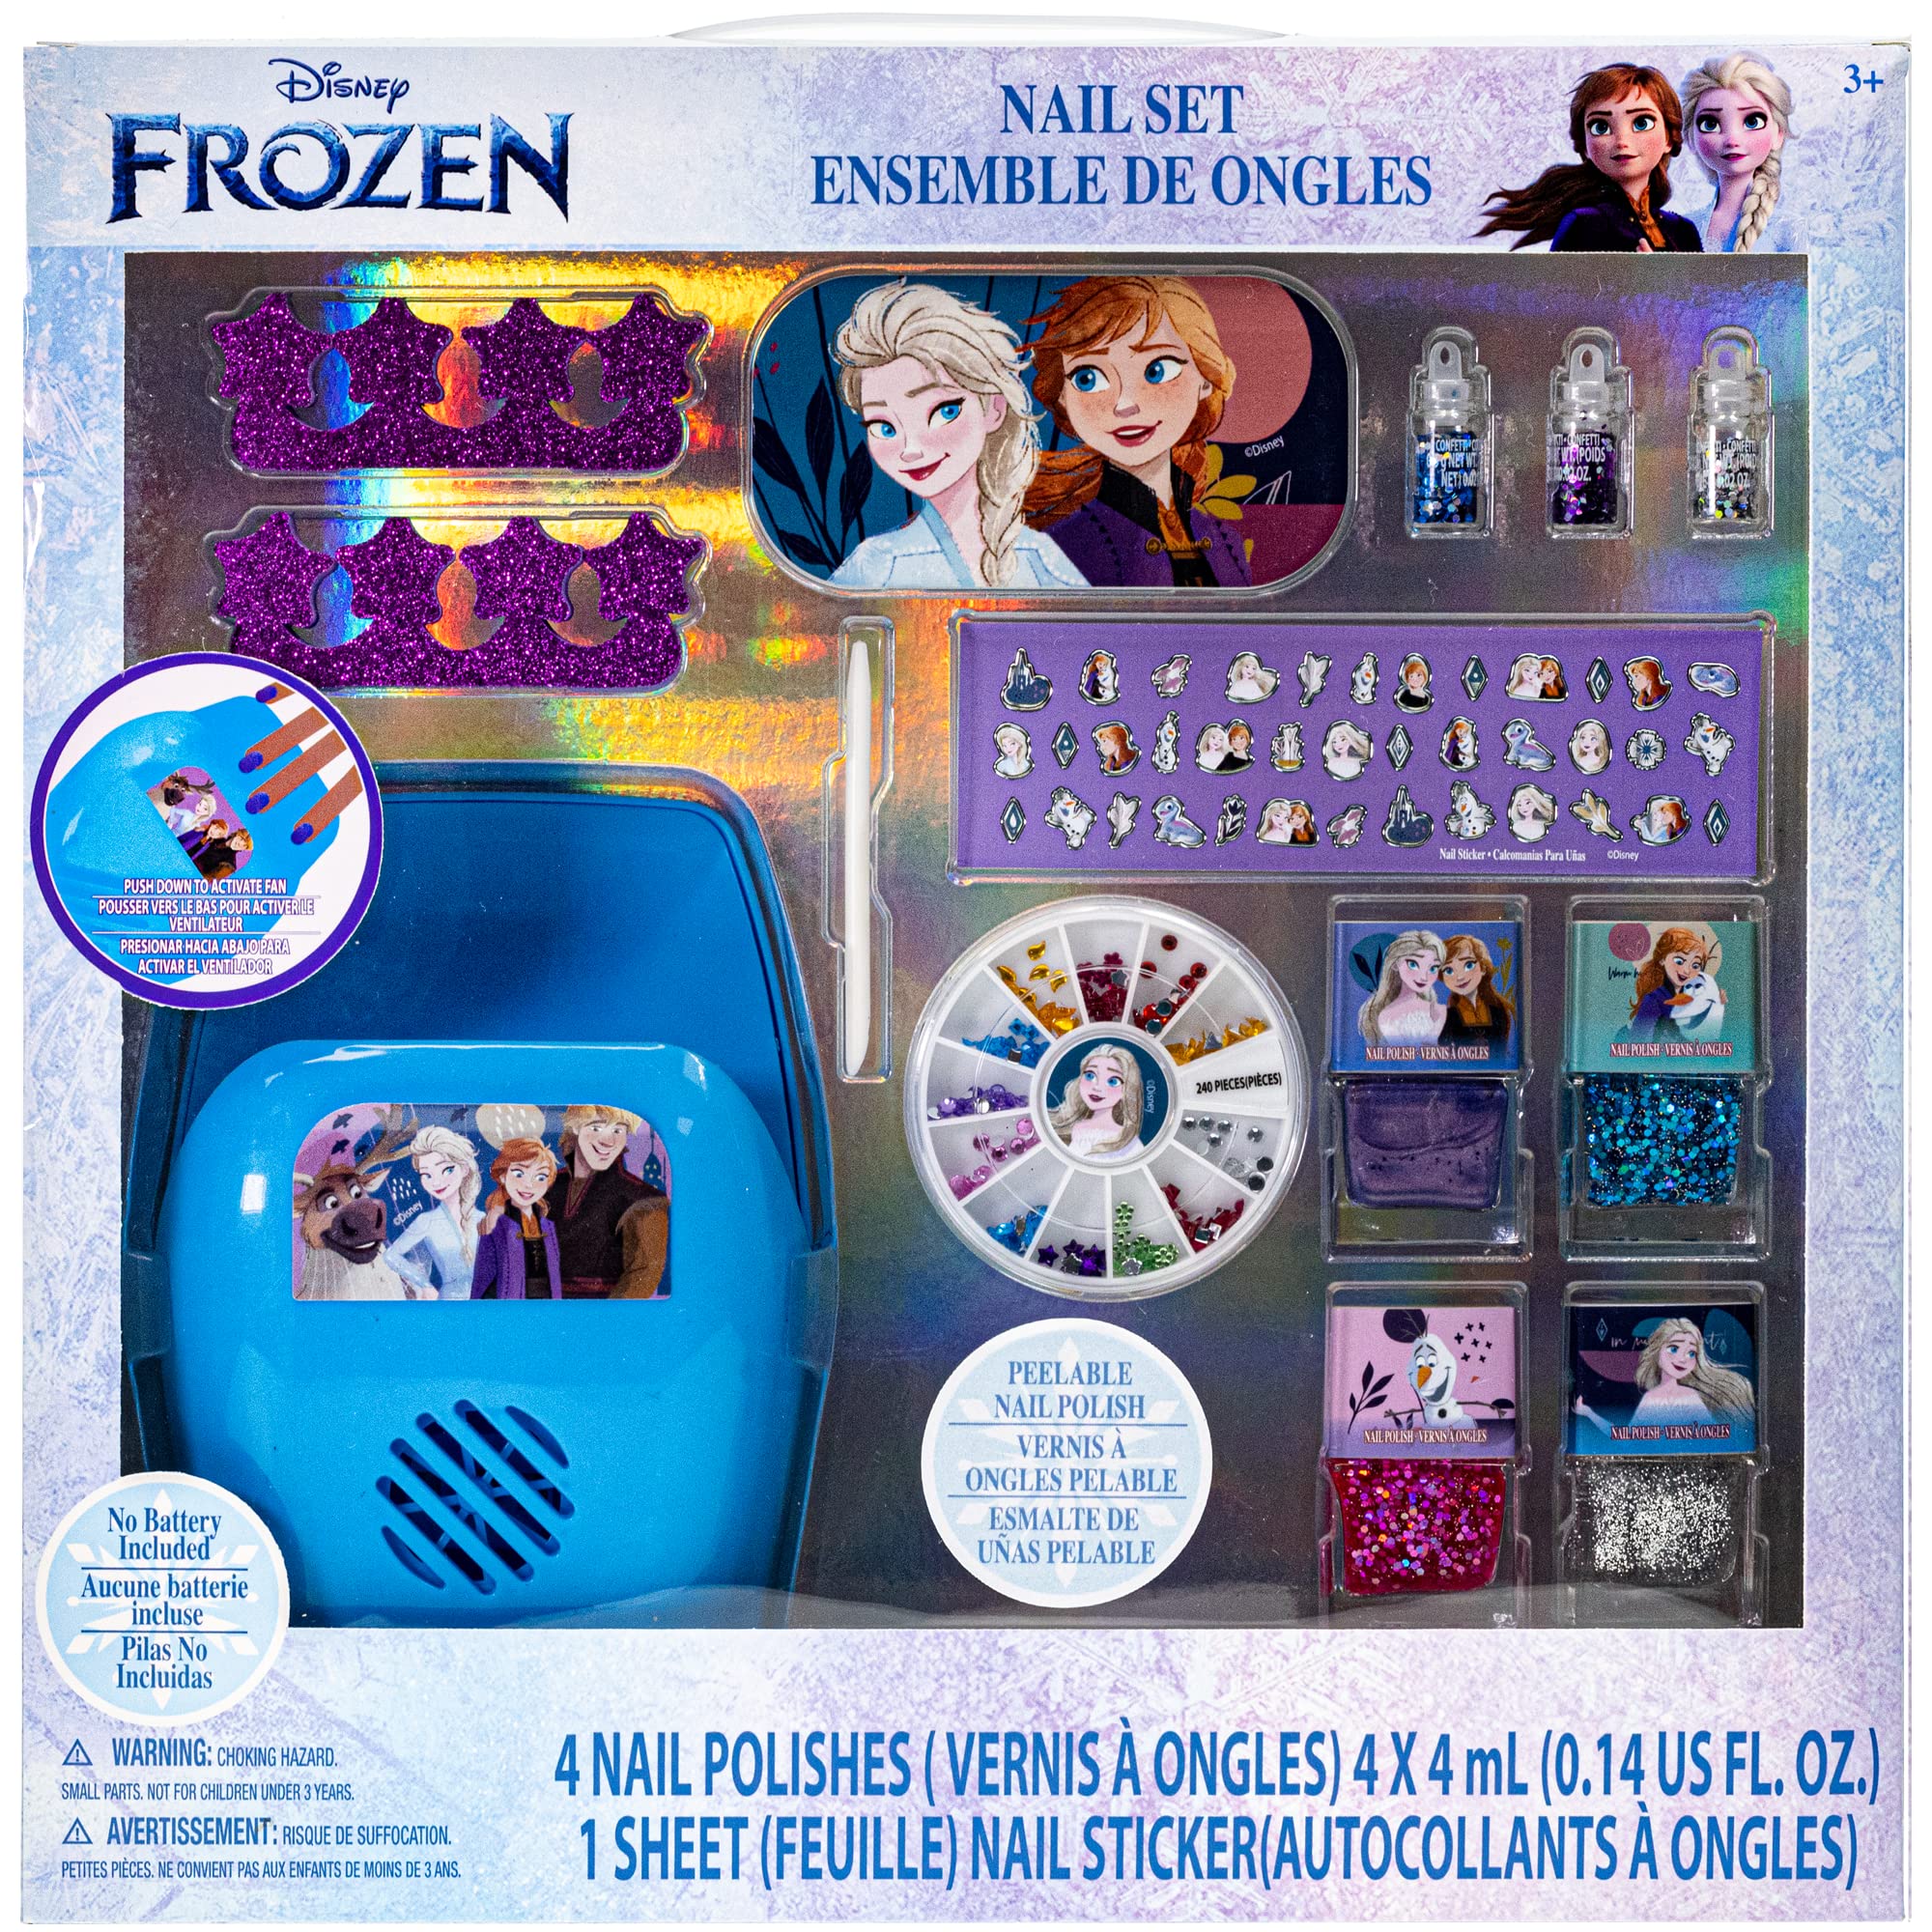 Disney Frozen Girls Art Kit with Carrying Tin Gel Pens Markers Stickers 200 PC by xpwholesale